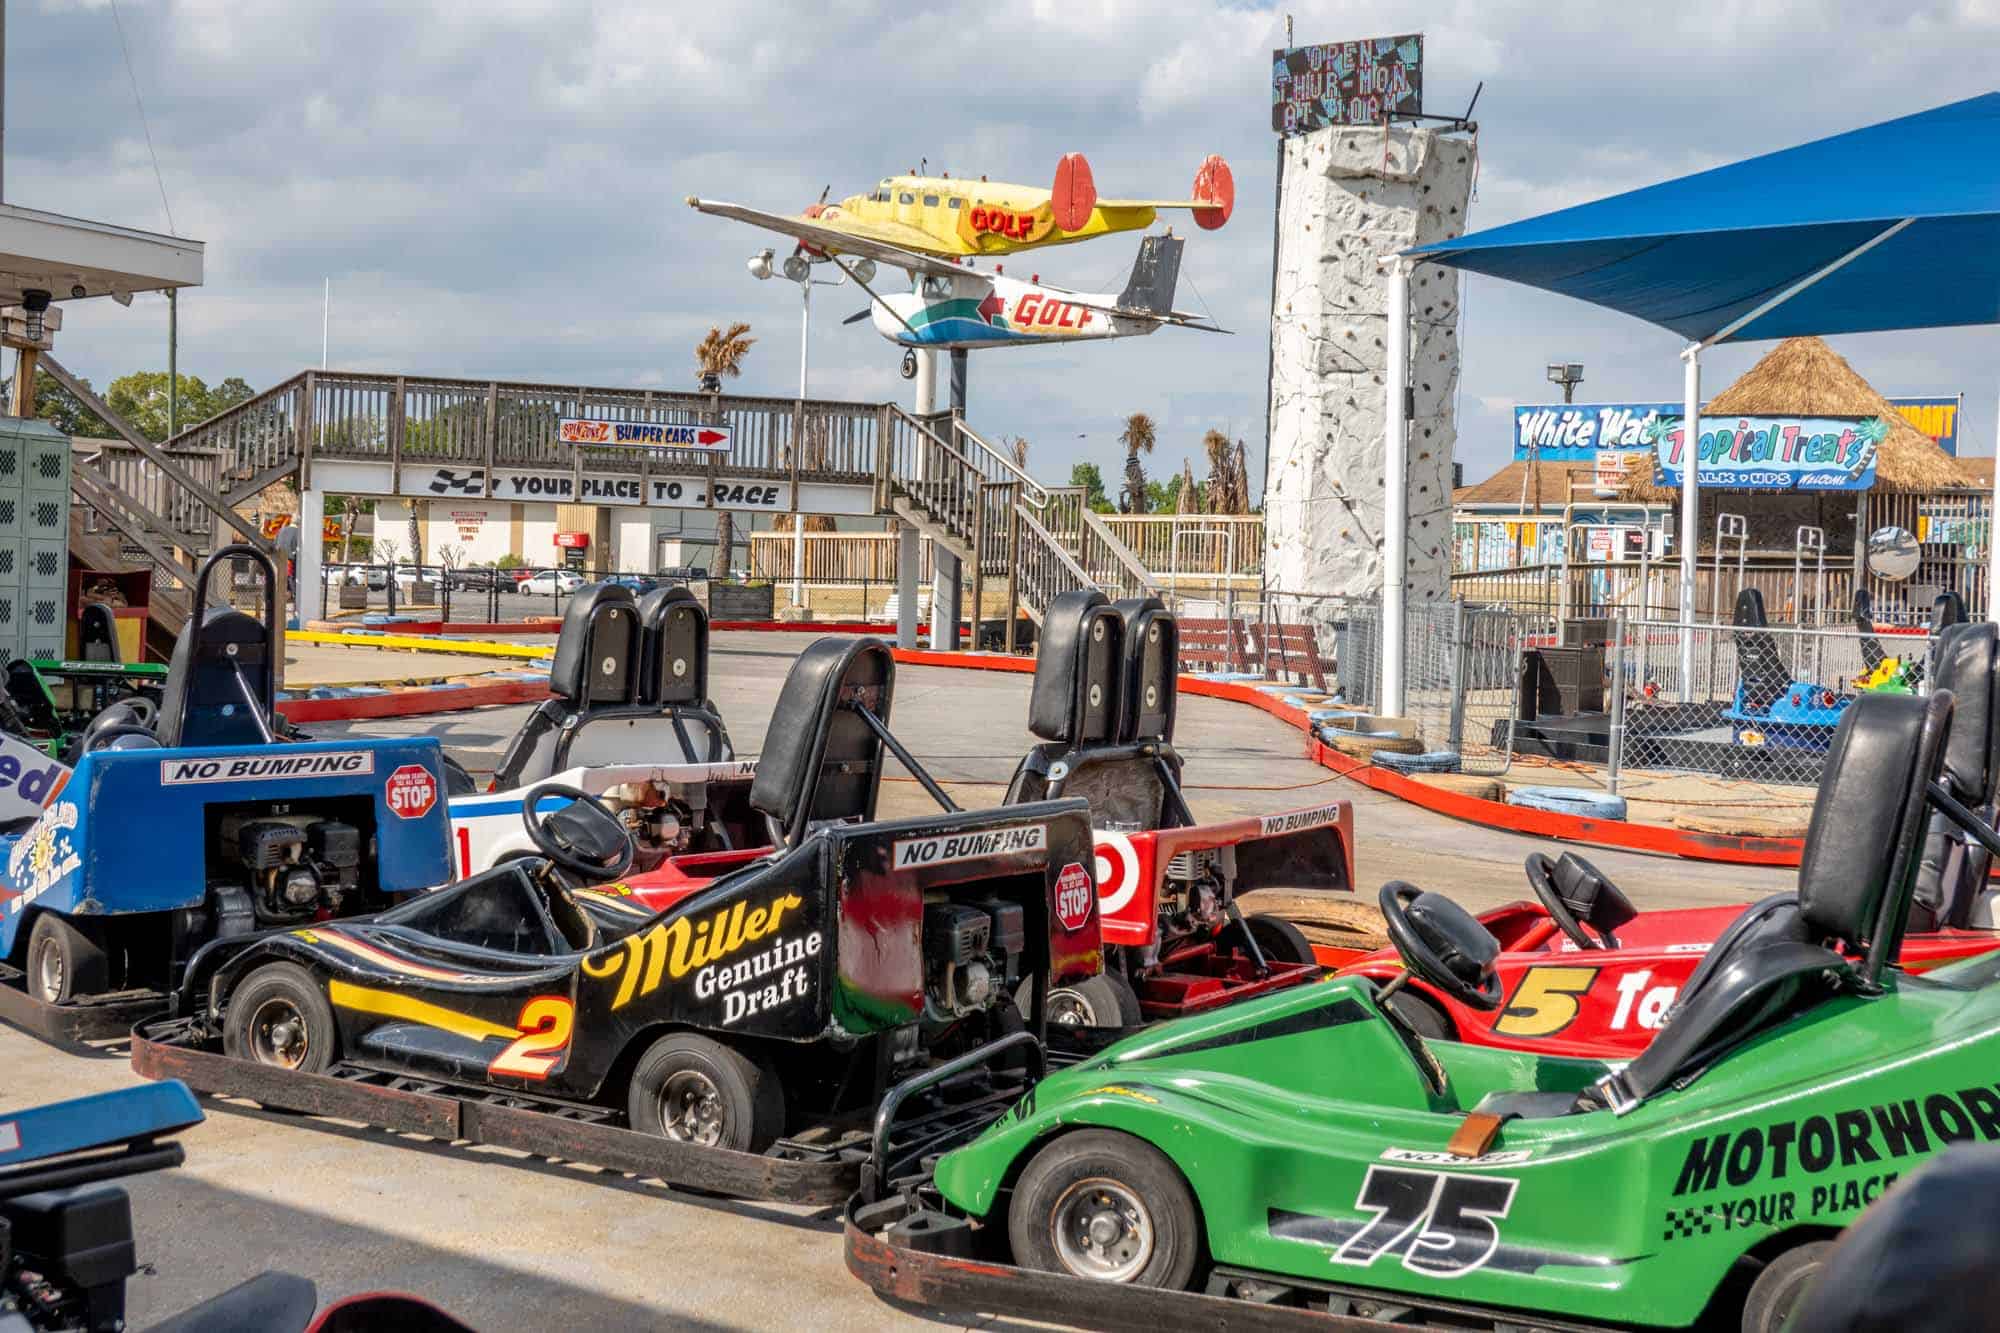 Go karts stopped on a tracks with two small planes displayed in the background